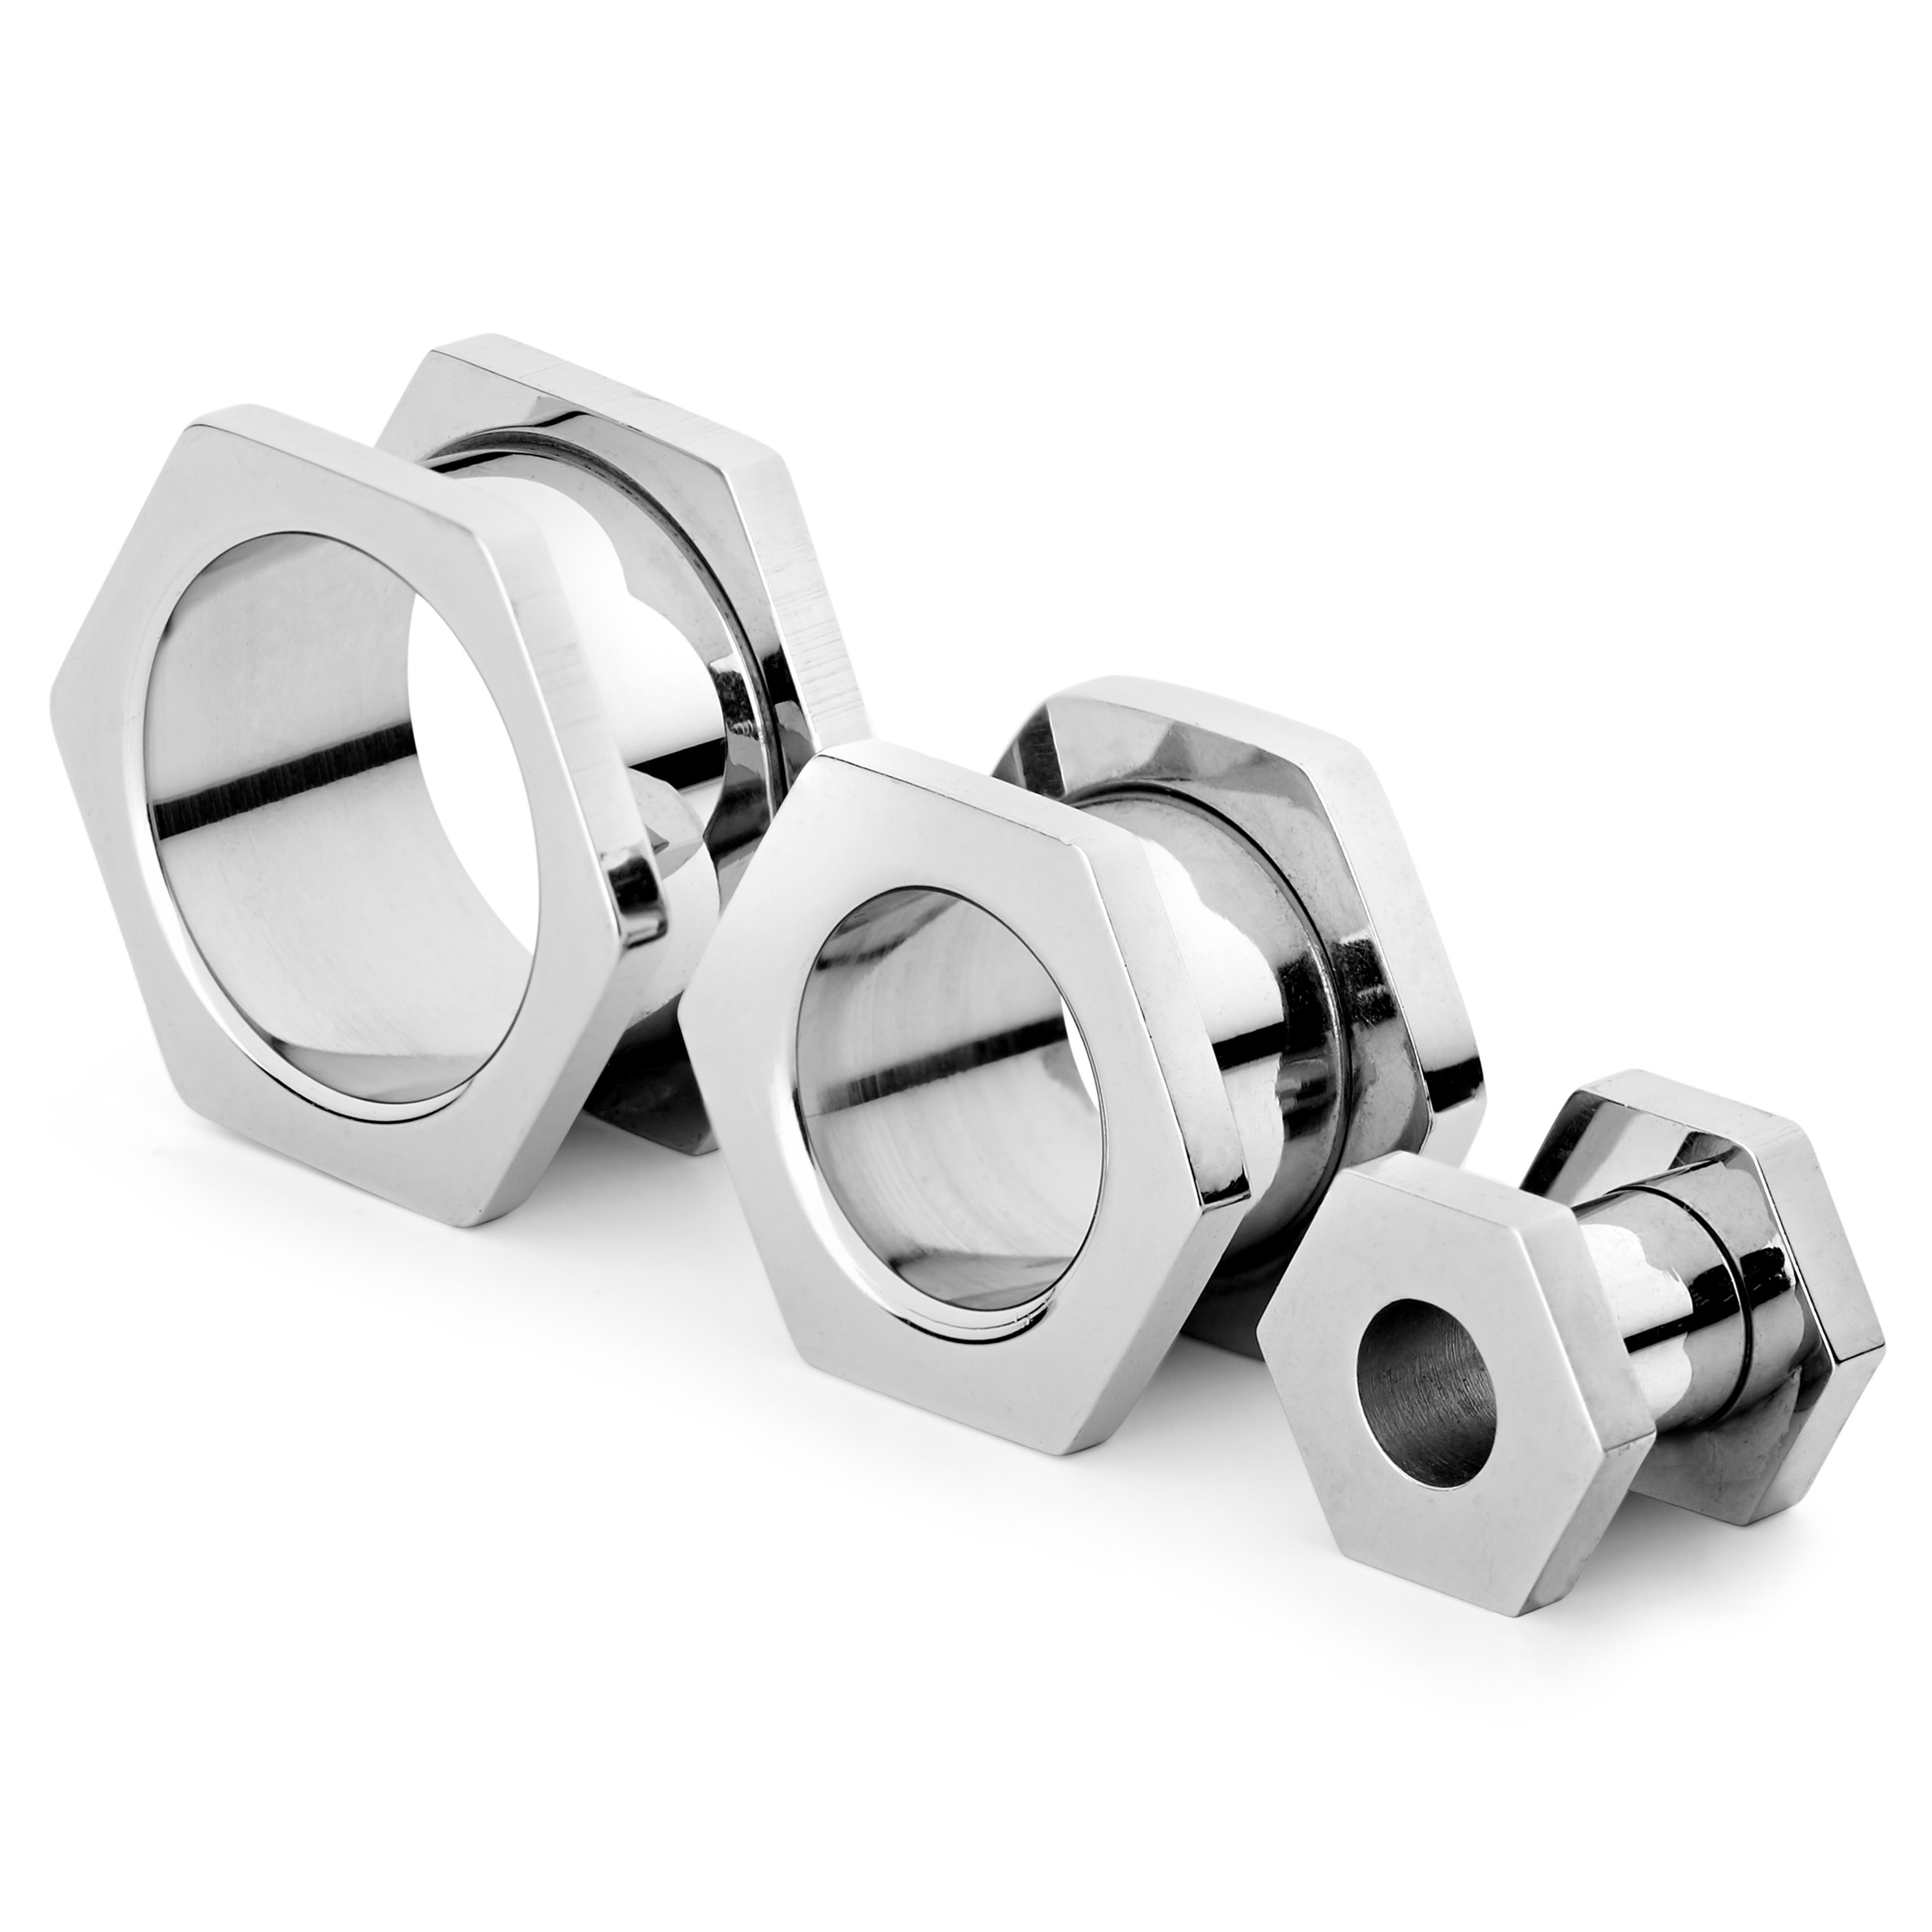 Silver-Tone Stainless Steel Nut-Shaped Tunnel Earring